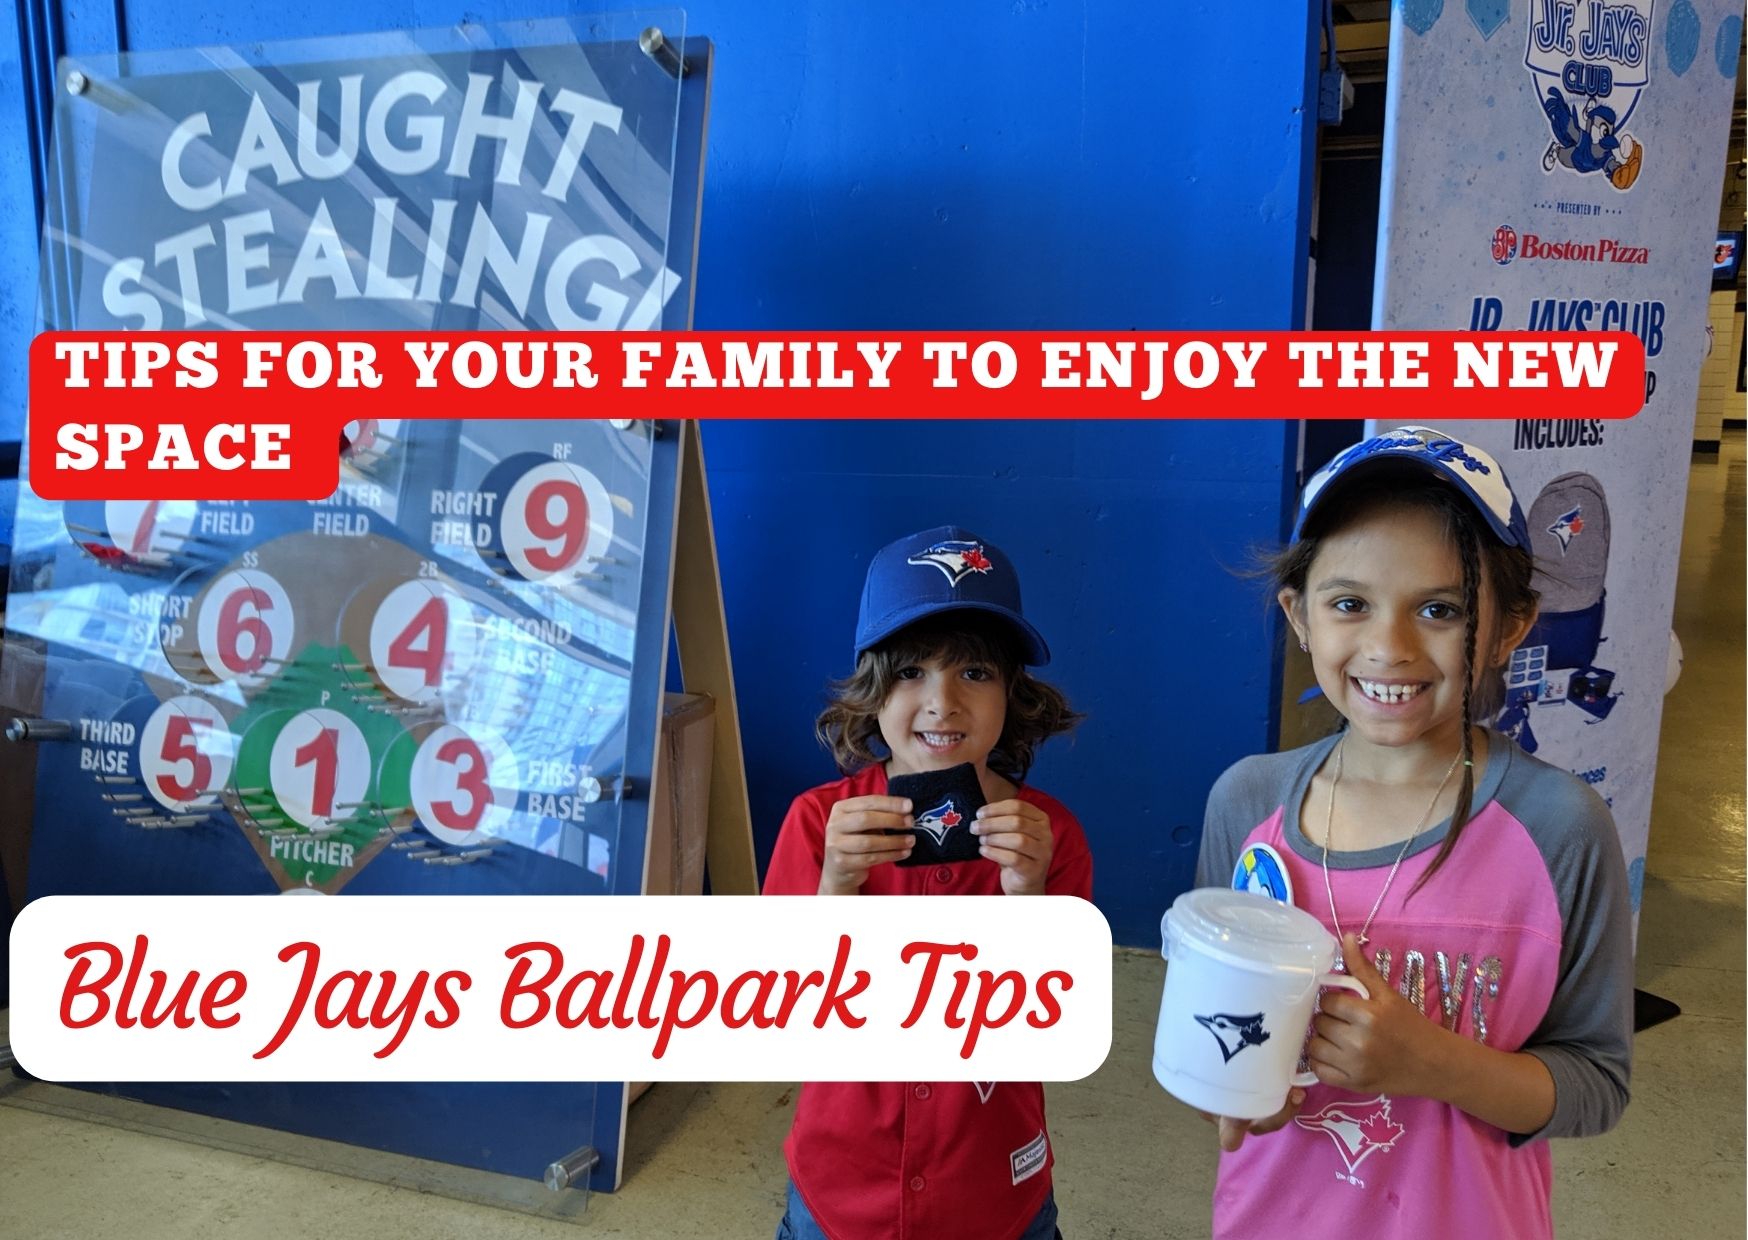 Tips to help your family plan a blue jays game with kids